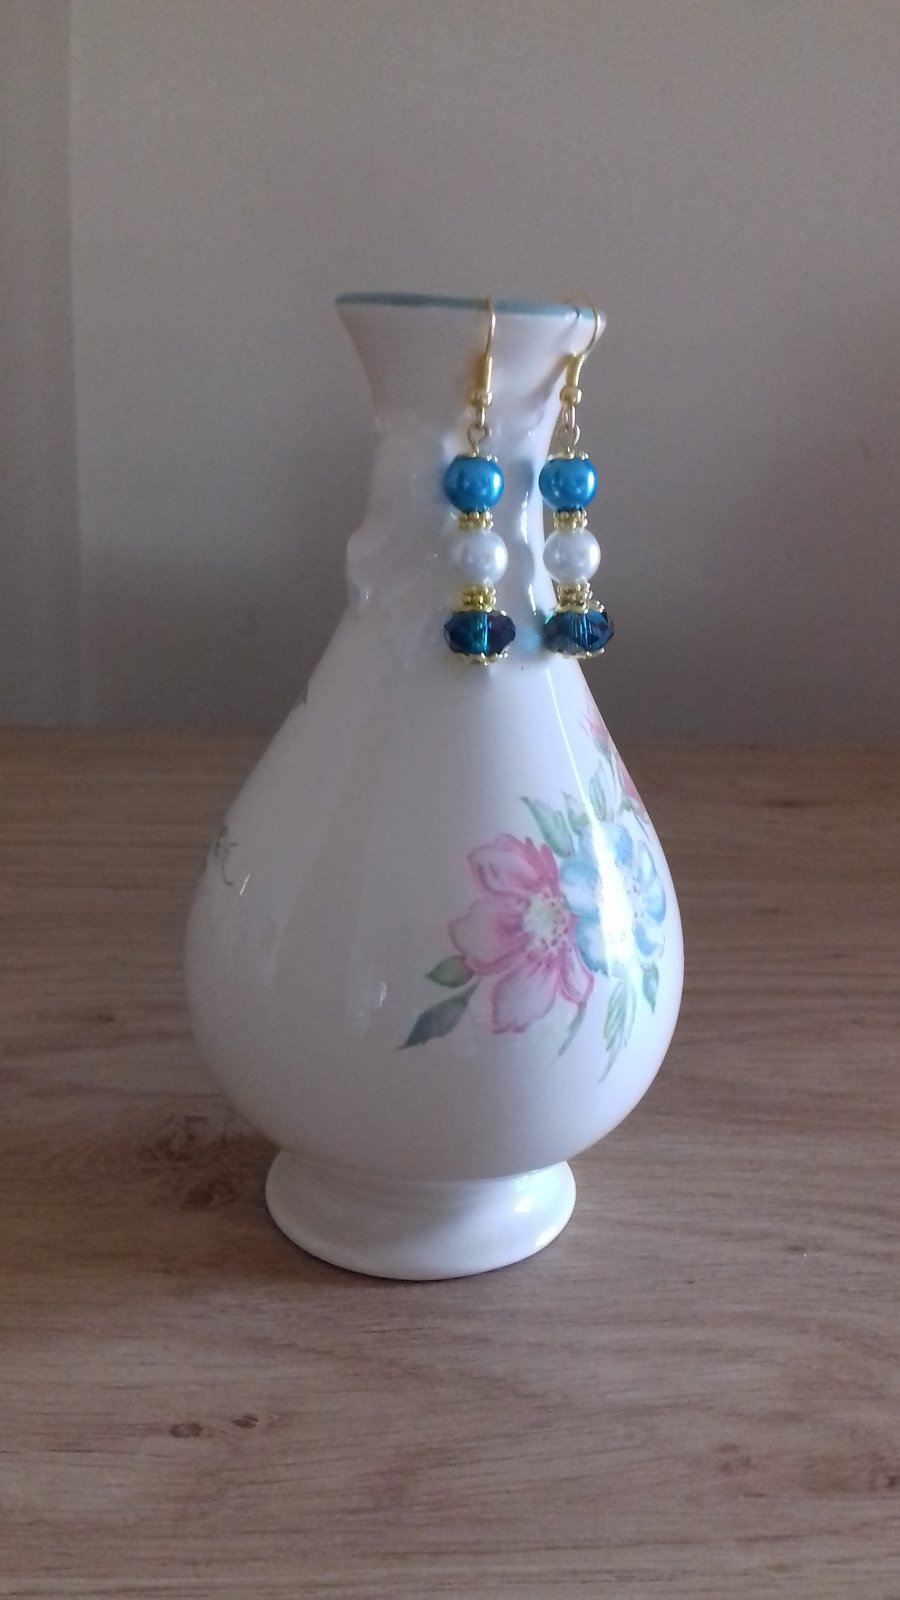 AQUA, TURQUOISE, WHITE AND GOLD FANCY DROP EARRINGS.